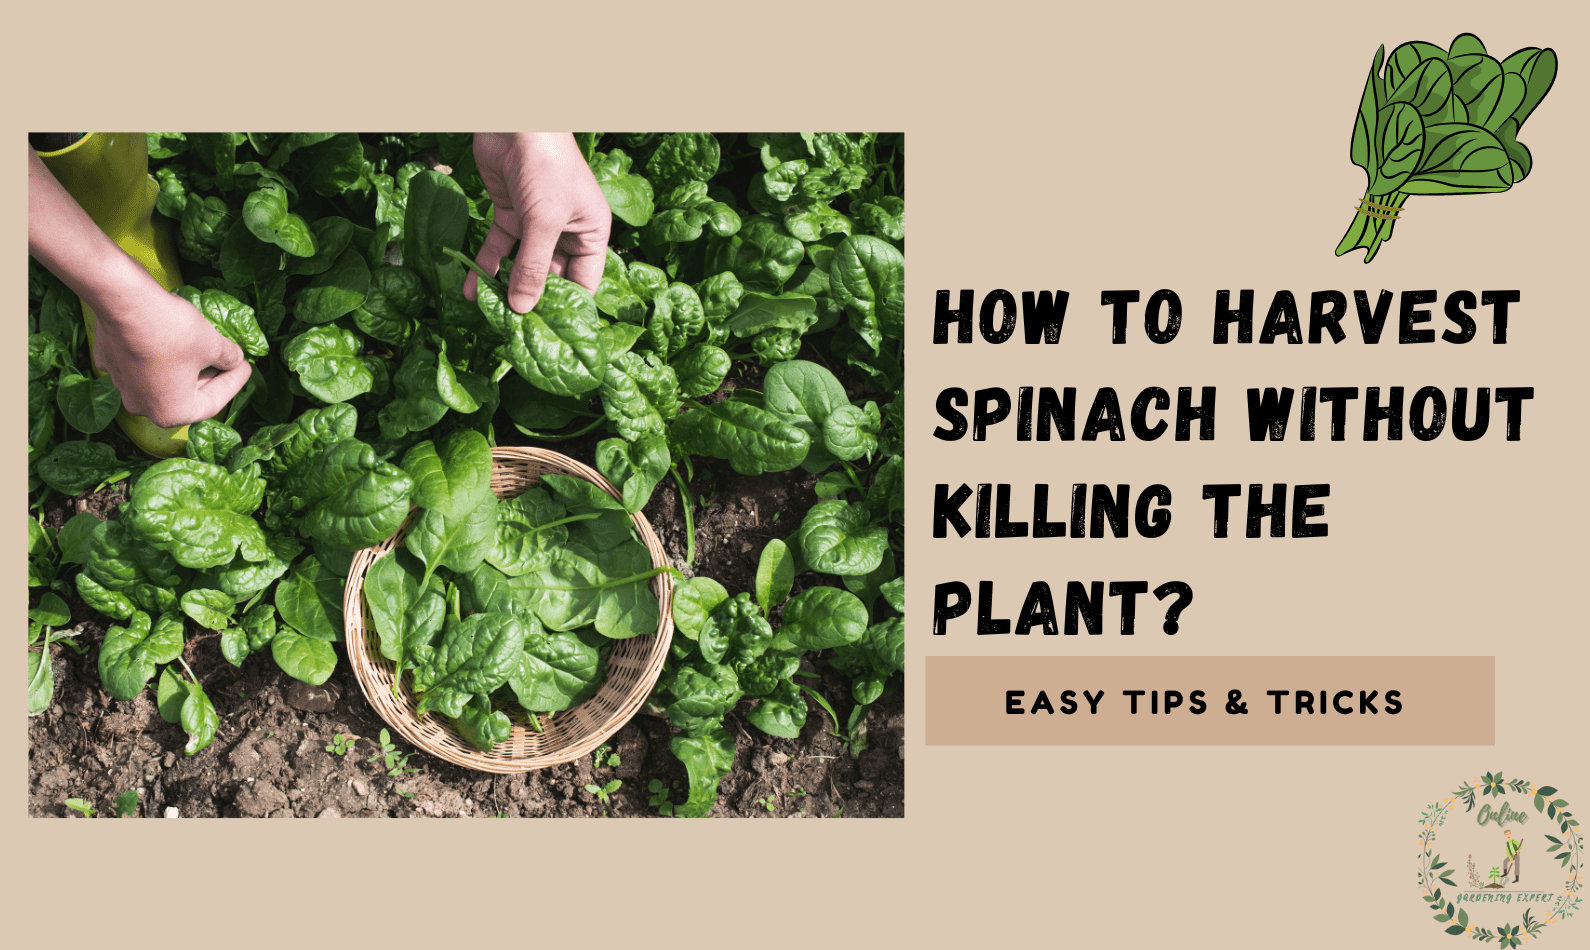 How To Harvest Spinach Without Killing The Plant?